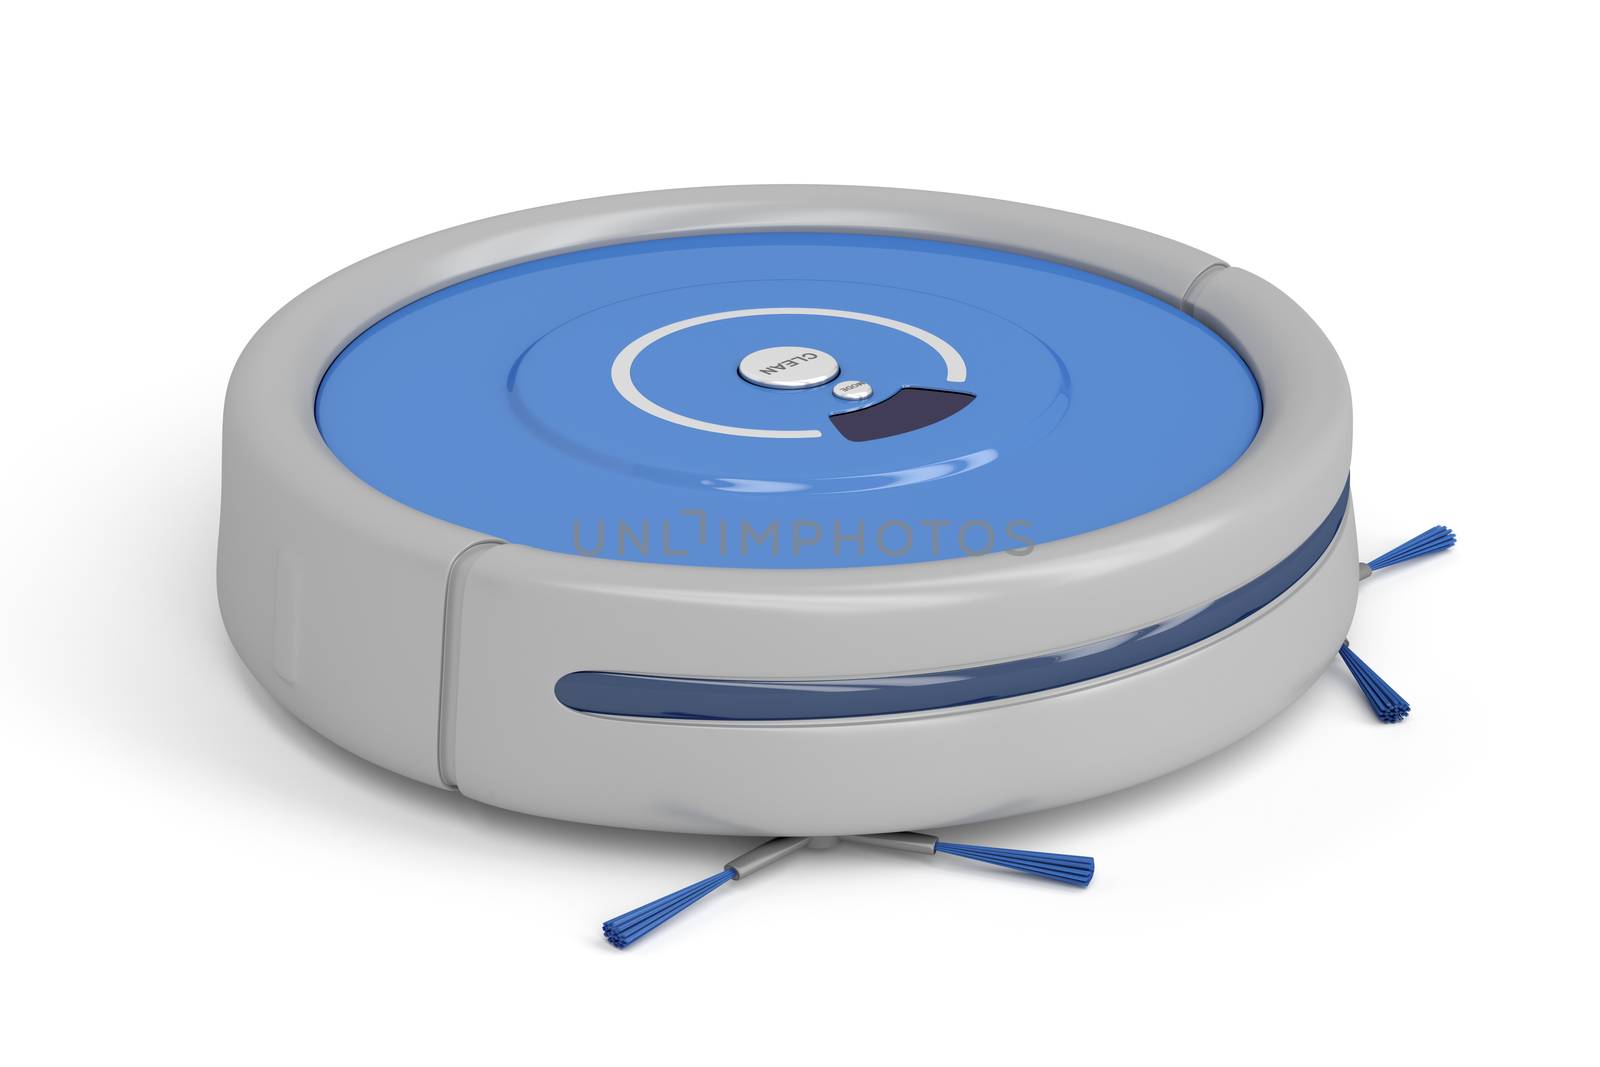 Robot vacuum cleaner by magraphics